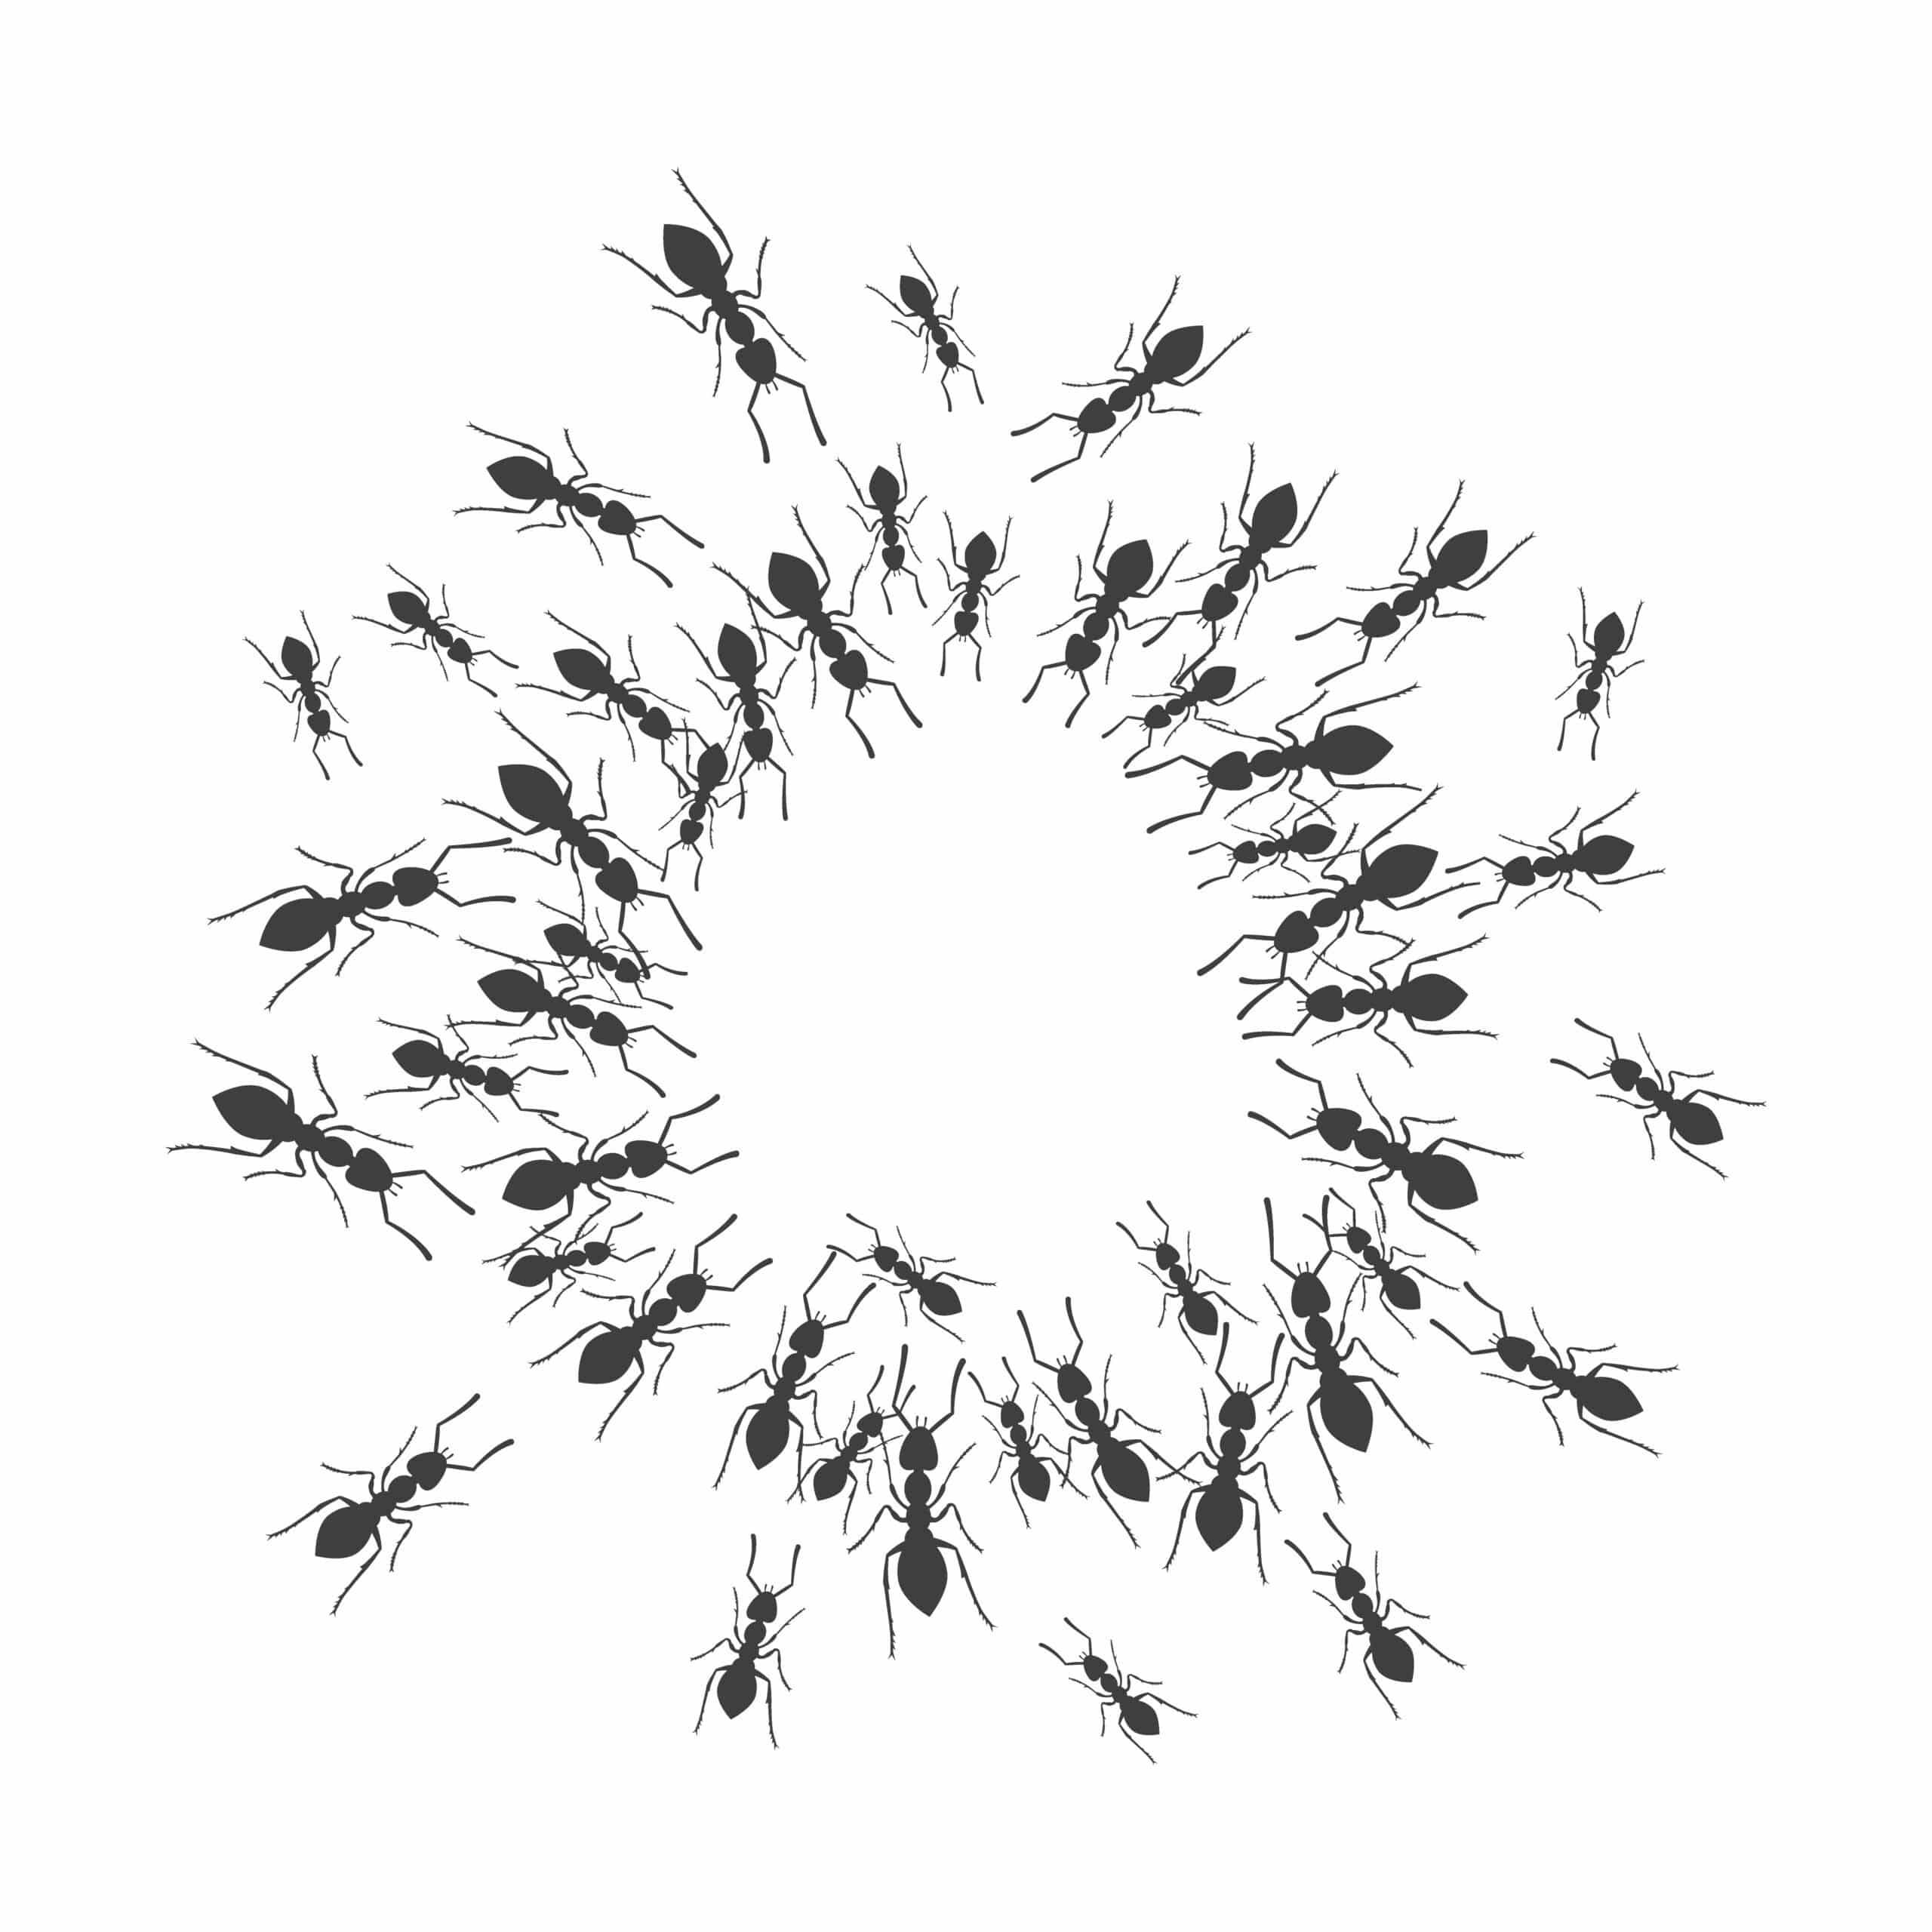 Illustration of ants gathering in a circle